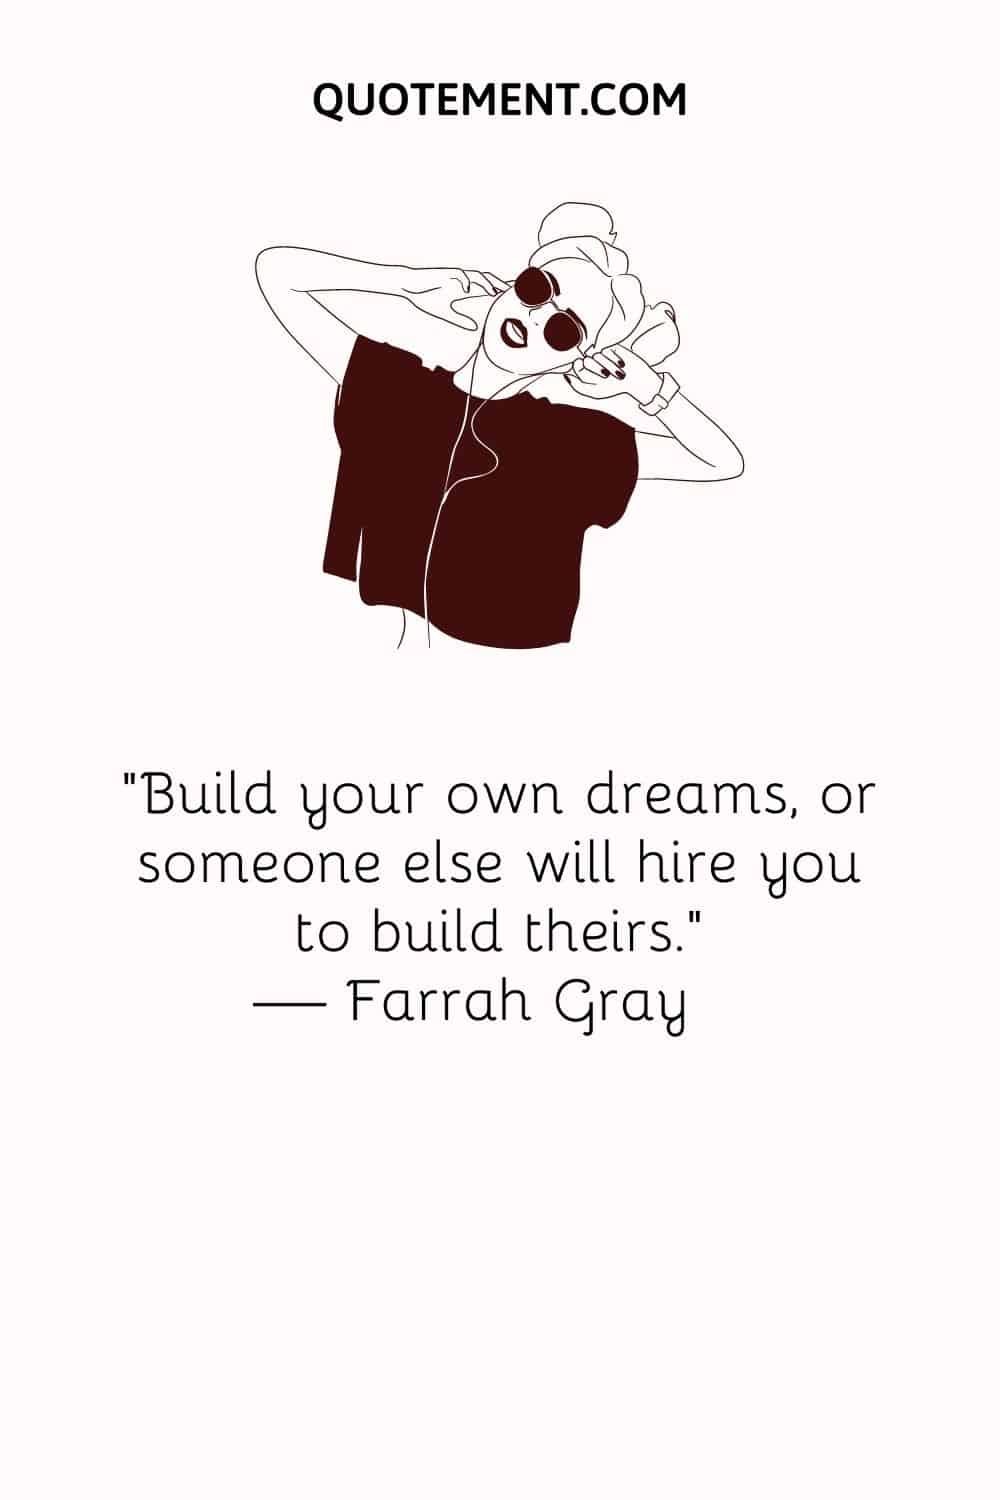 “Build your own dreams, or someone else will hire you to build theirs.” — Farrah Gray